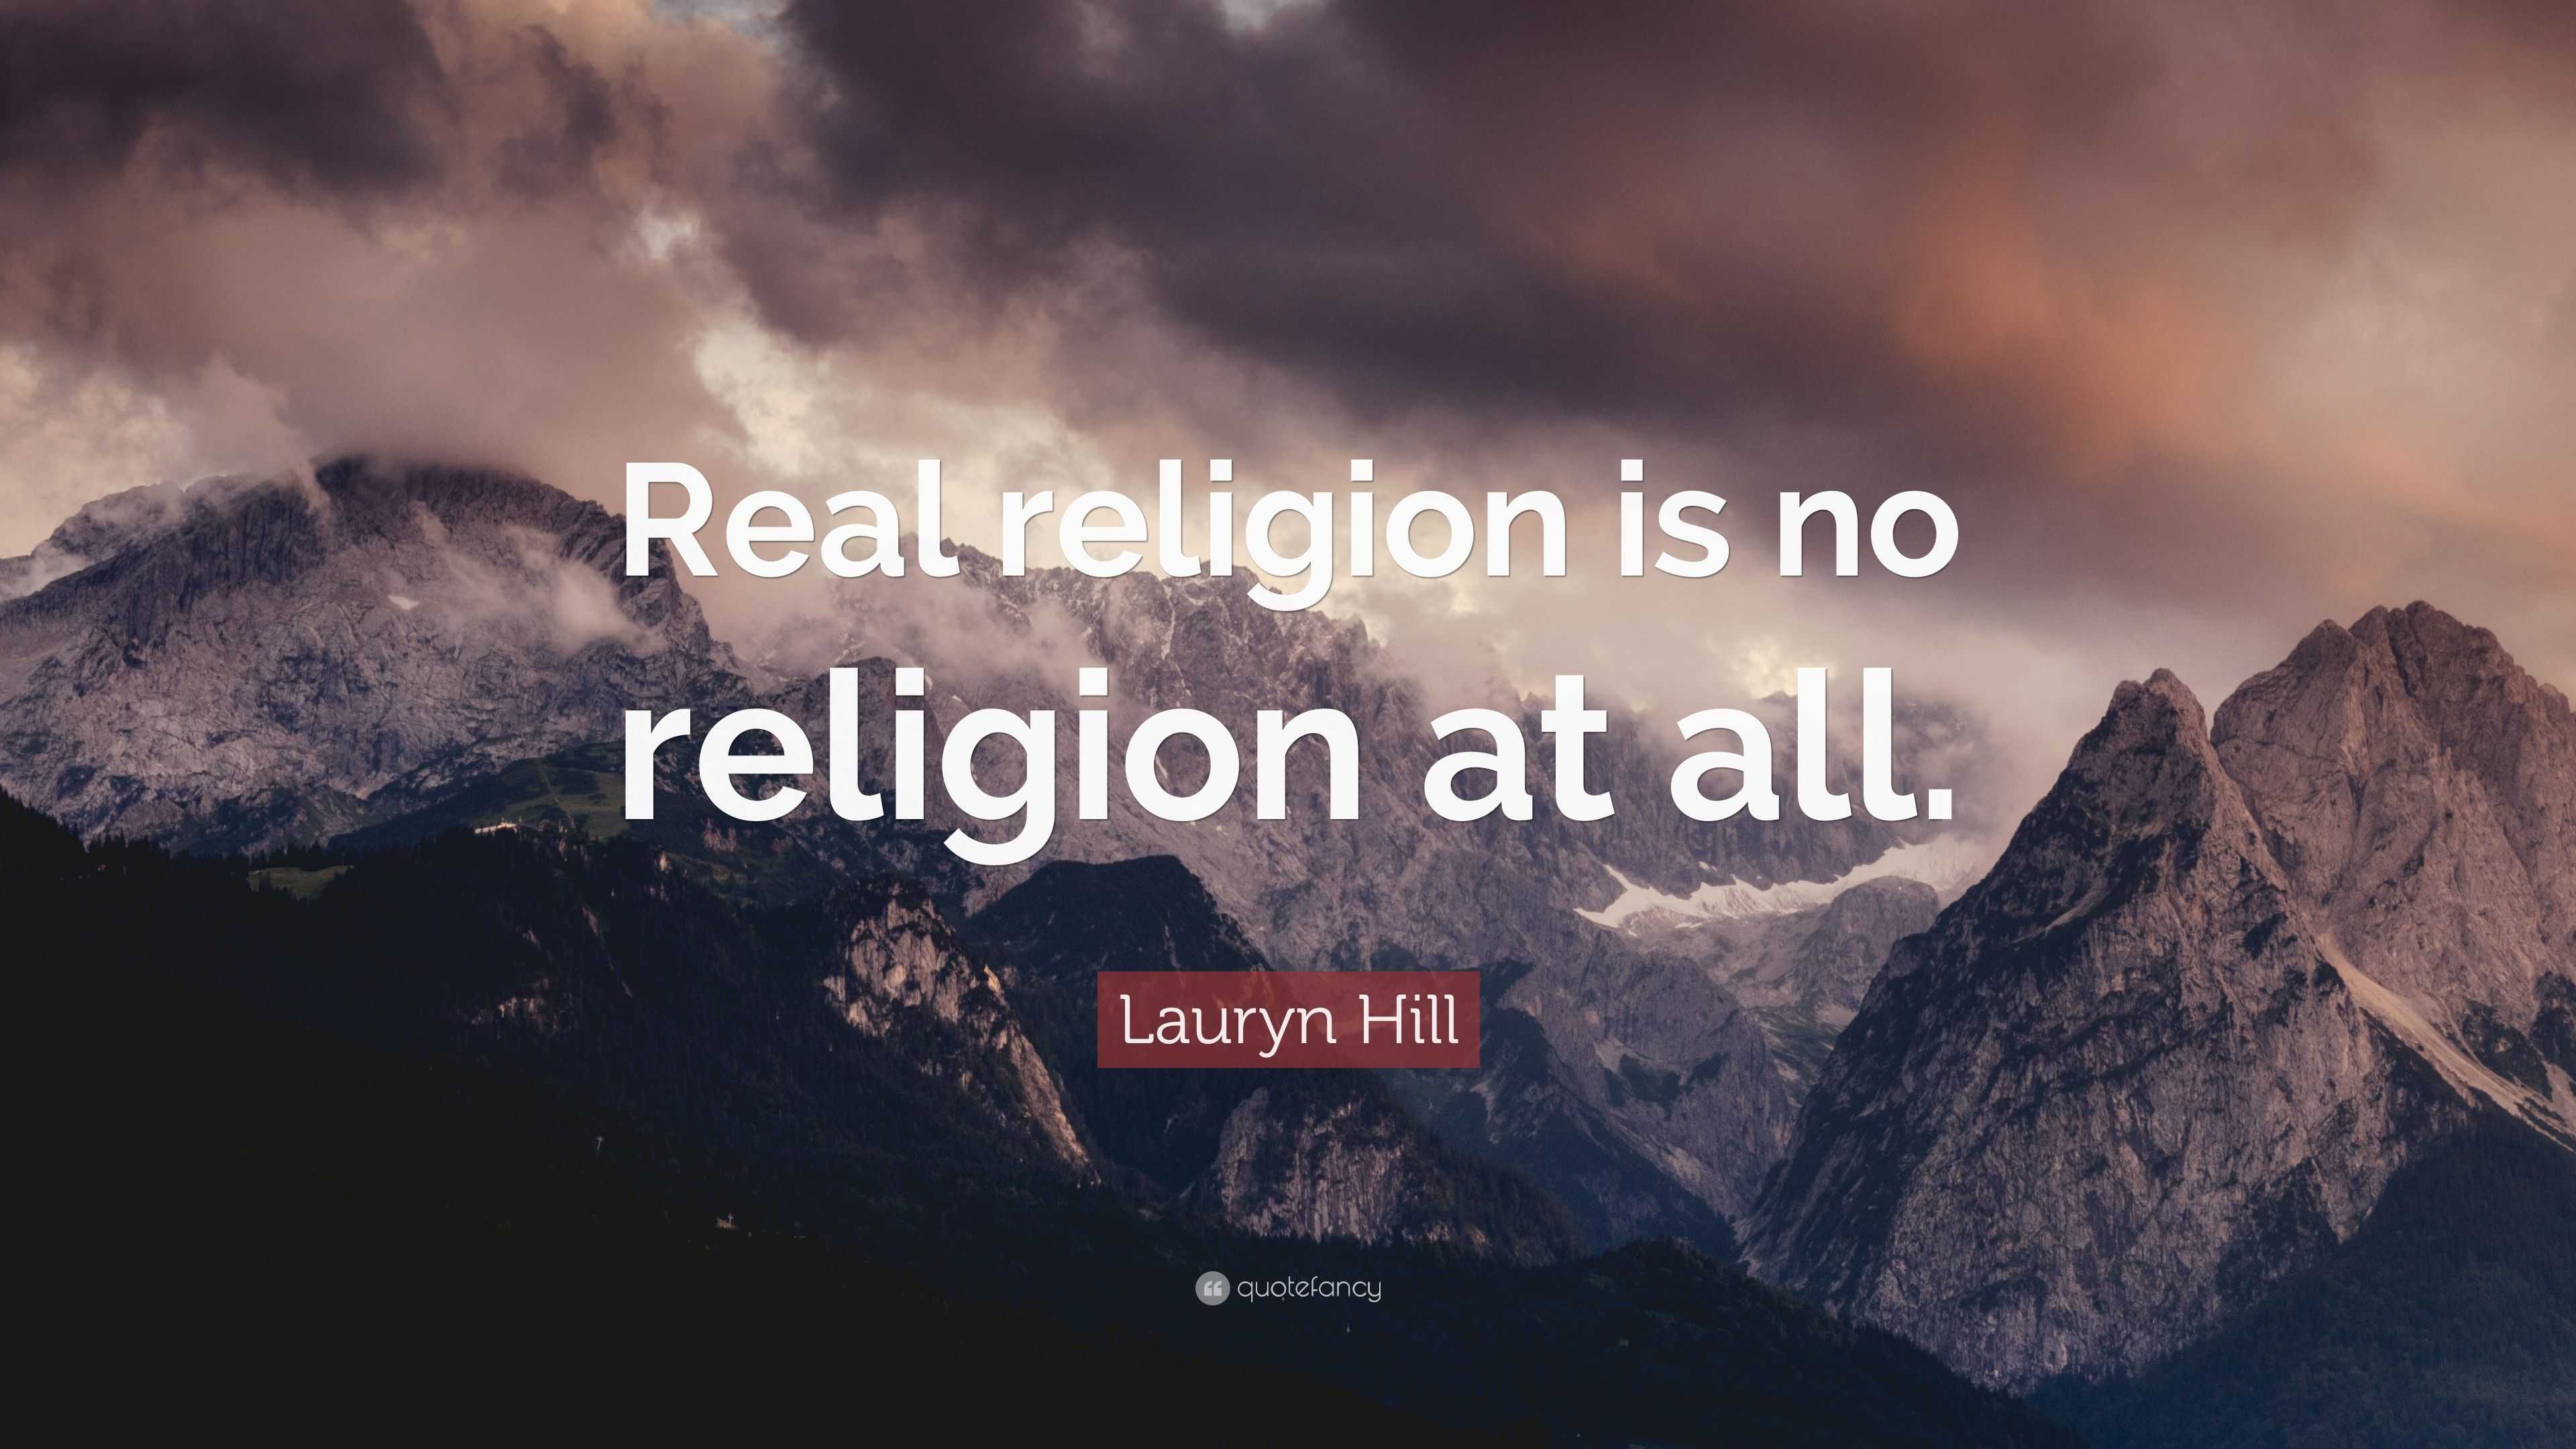 Lauryn Hill Quote: “Real religion is no religion at all.”